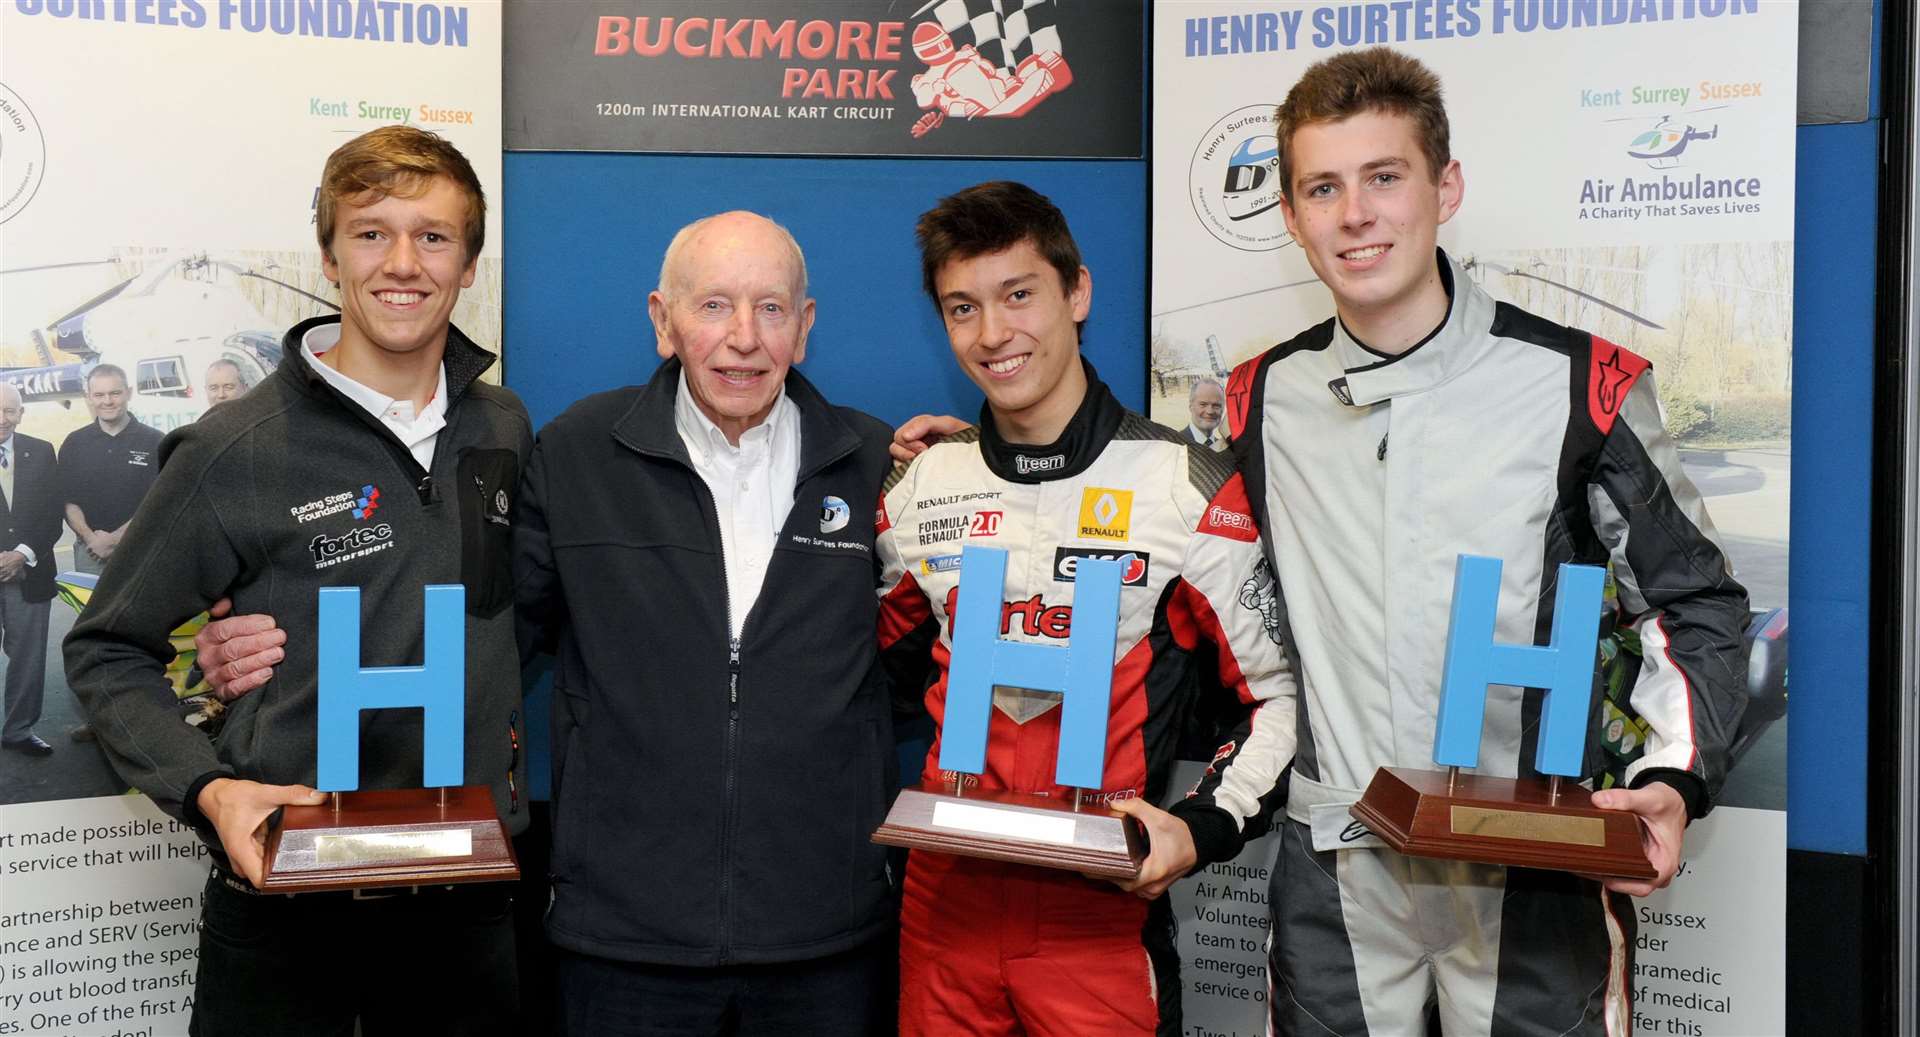 Jack Aitken, who made his F1 debut with Williams last year, won the Henry Surtees Challenge in 2014, beating Ben Barnicoat, left, and Ross Gunn. Picture: Simon Hildrew